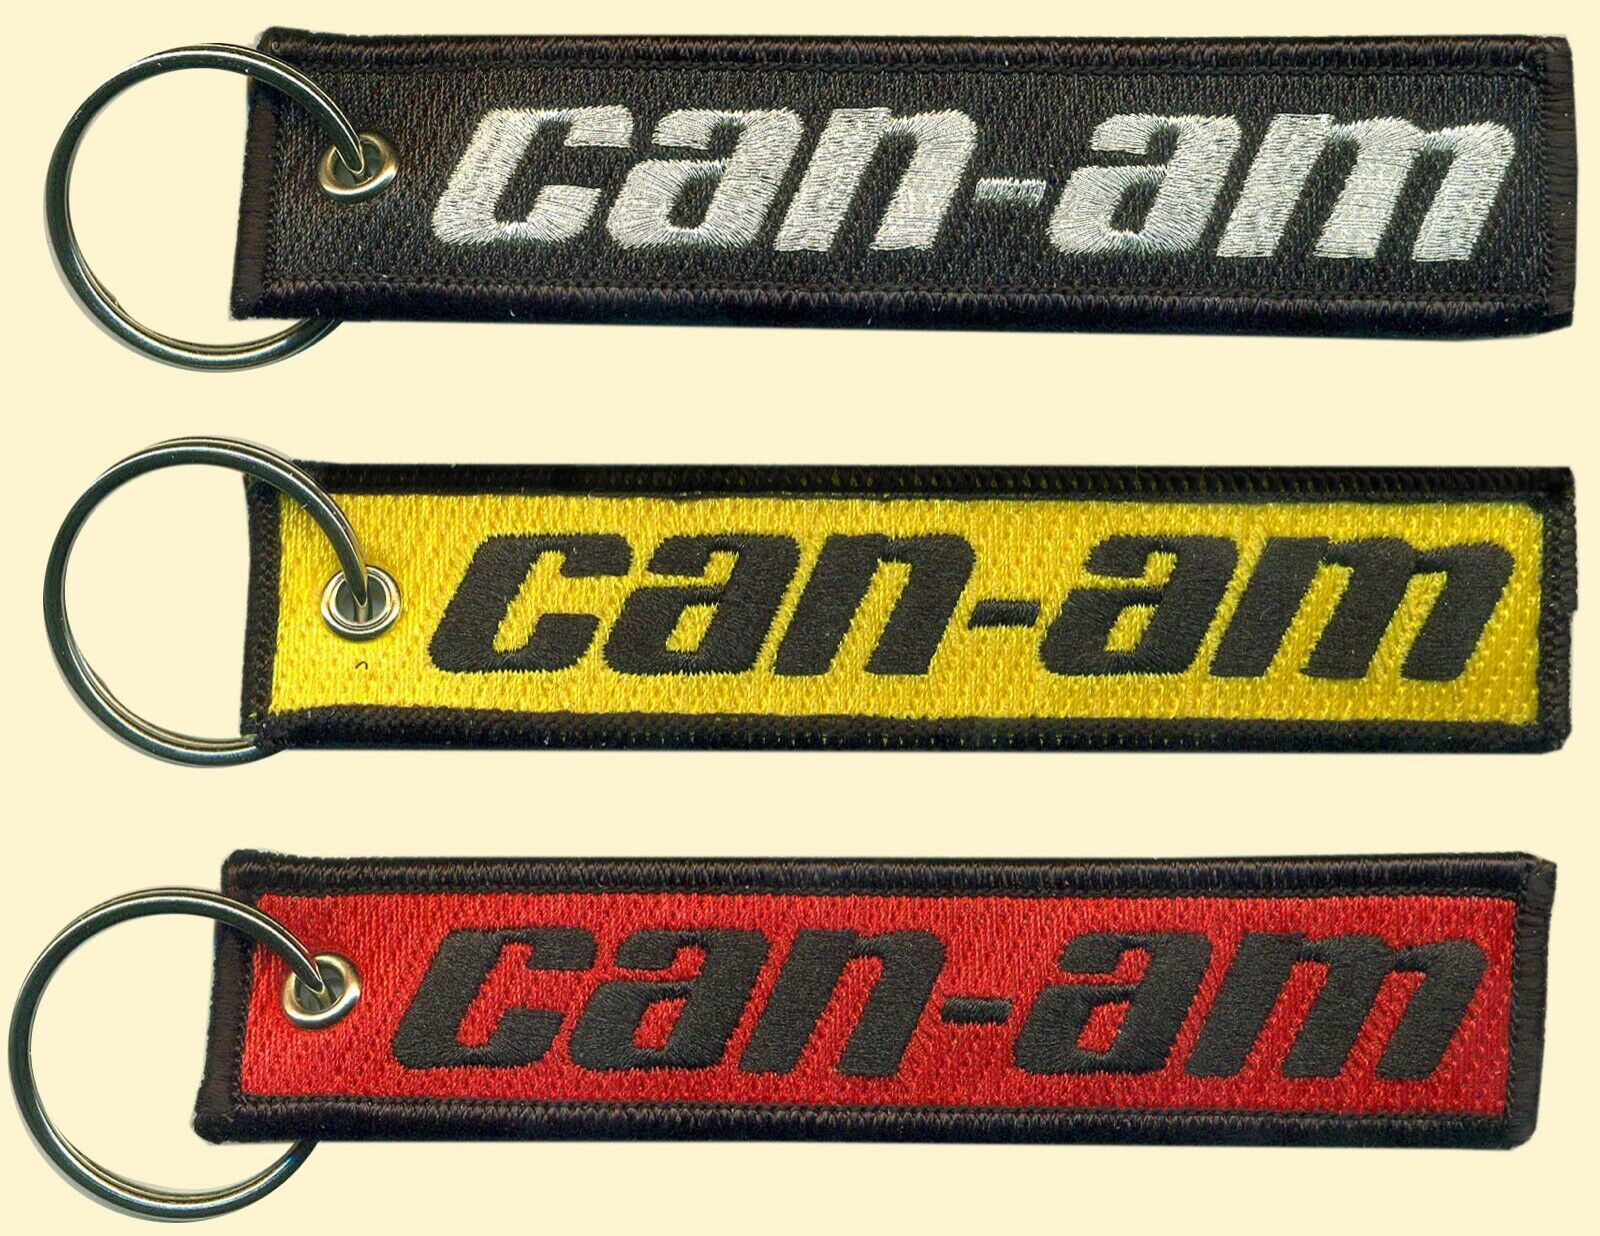 Can-am Embroidered Key Chain, 3 Wheel Motorcycles, Motorbikes, Off Road Vehicles